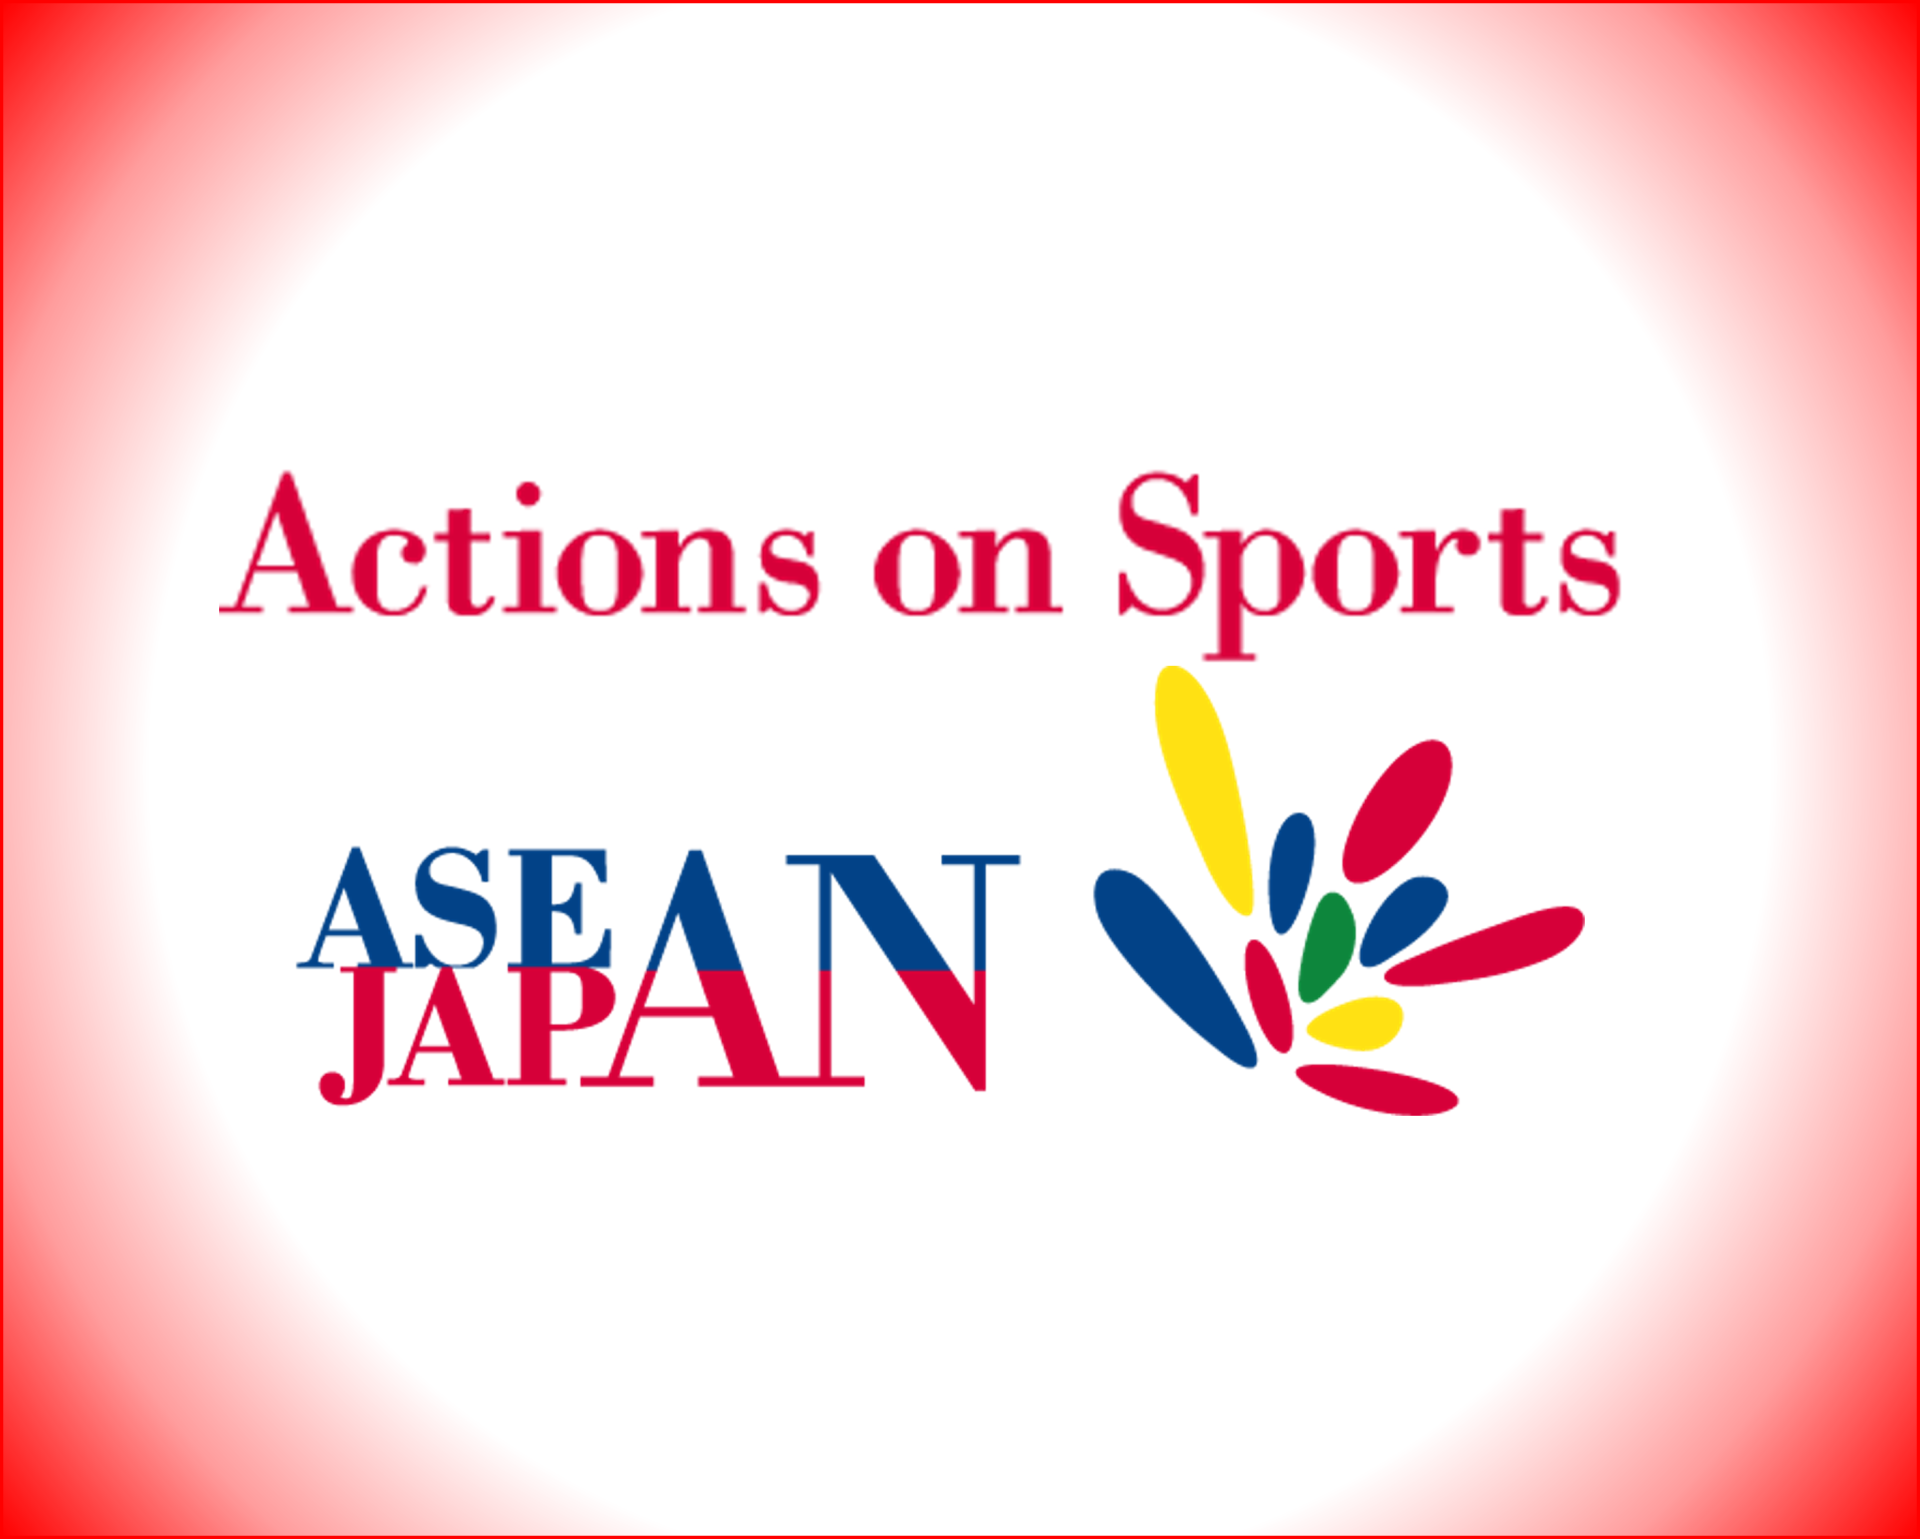 ASEAN-JAPAN Actions on Sports 2021 Open Symposium